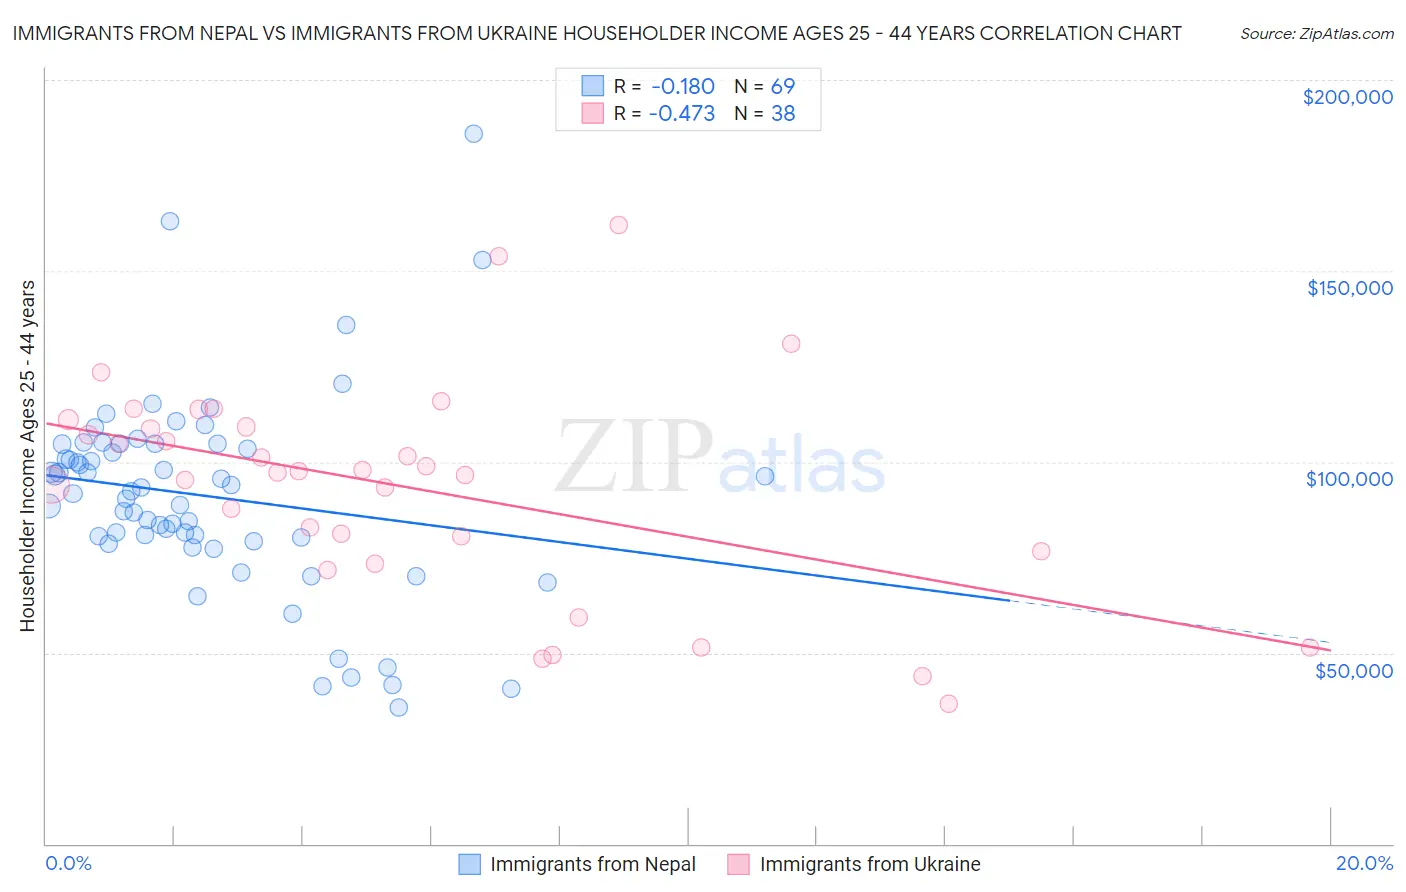 Immigrants from Nepal vs Immigrants from Ukraine Householder Income Ages 25 - 44 years